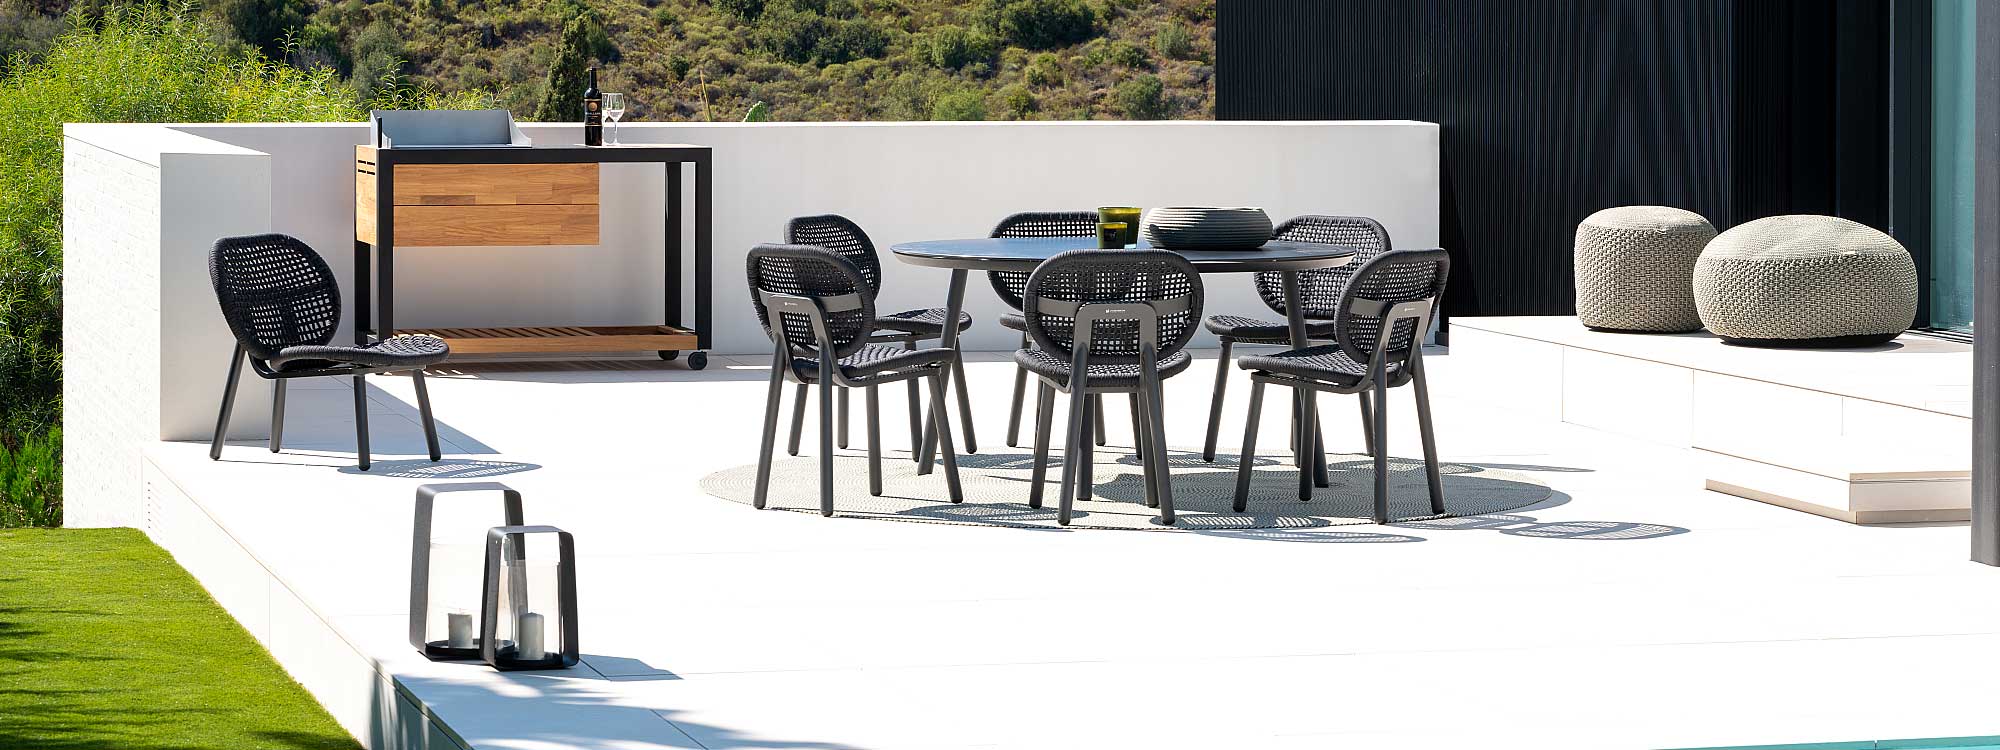 Image of Skate black garden dining chairs around Durham circular table by Jati & Kebon, shown on white-washed poolside